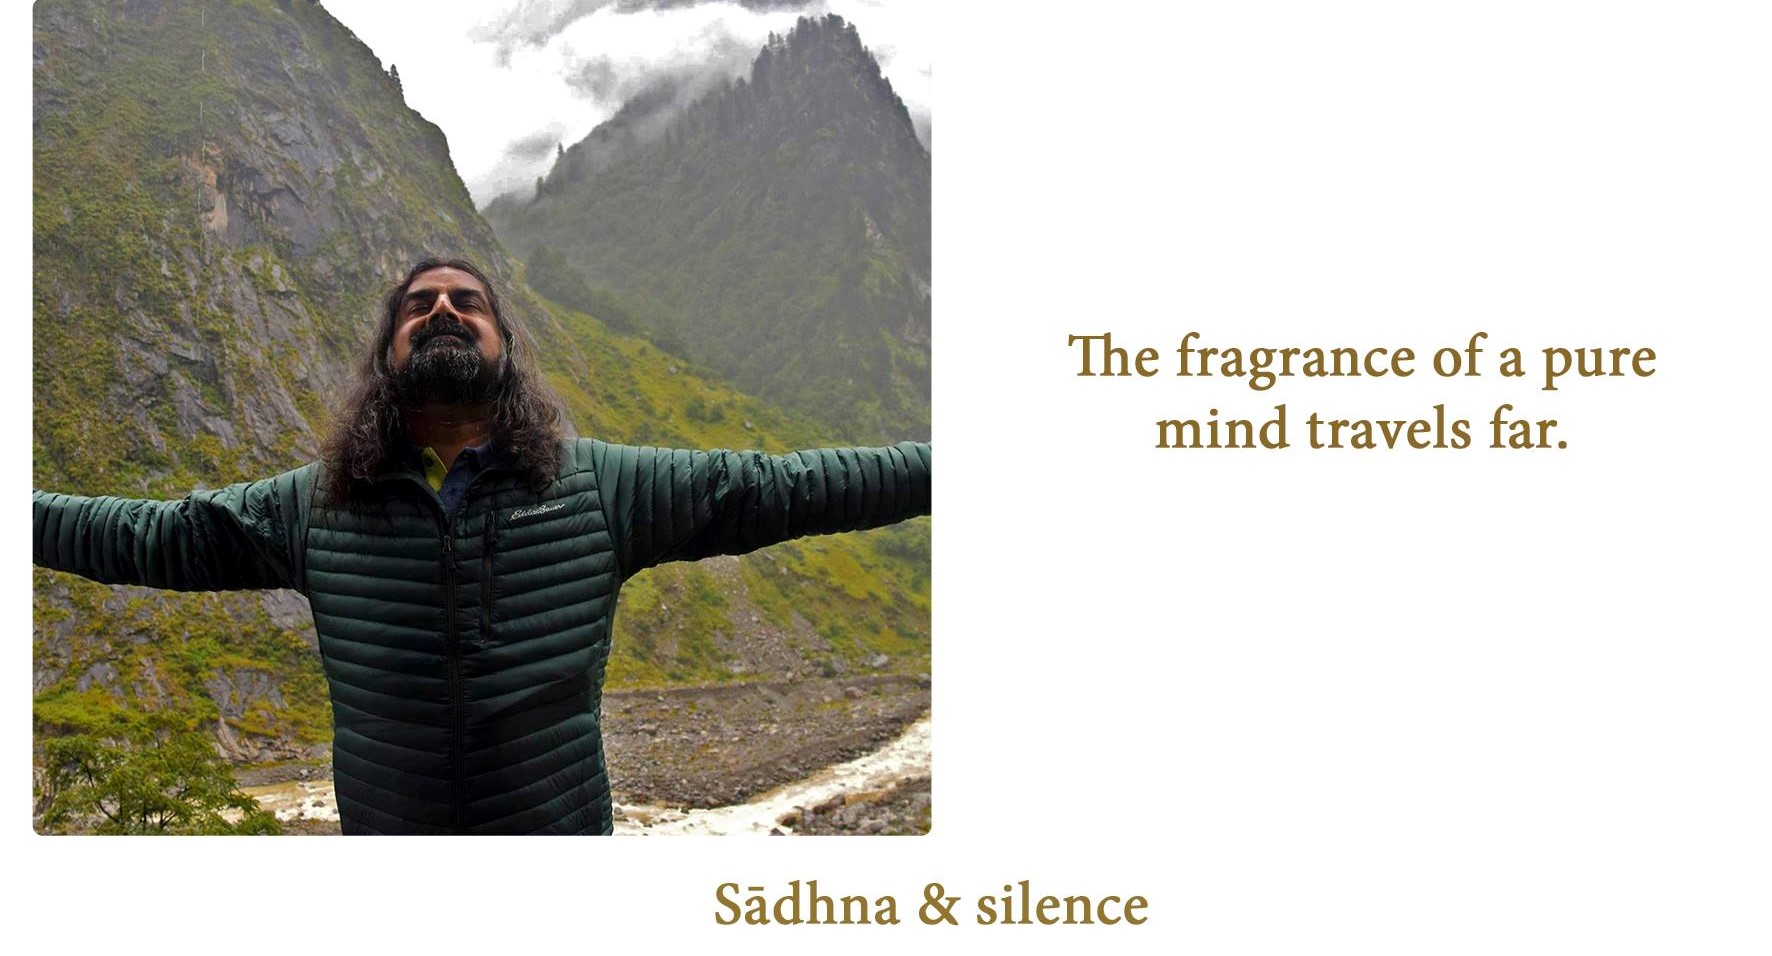 "The fragrance of a pure mind travels far."